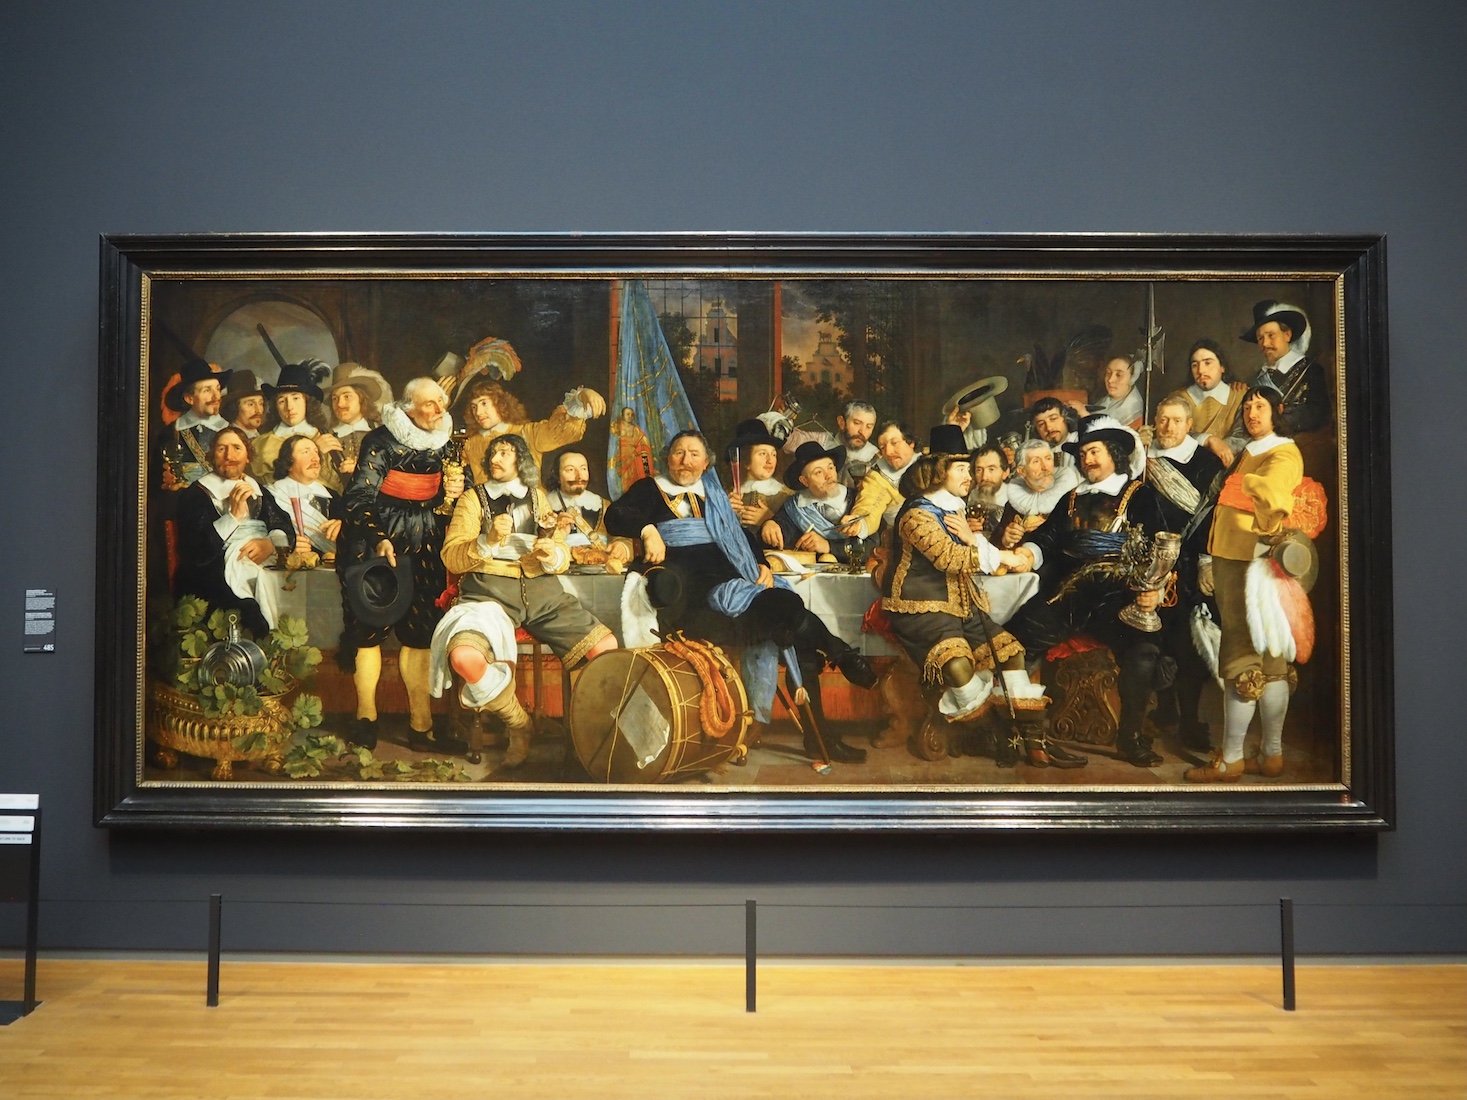 A rather large painting! Rijksmuseum